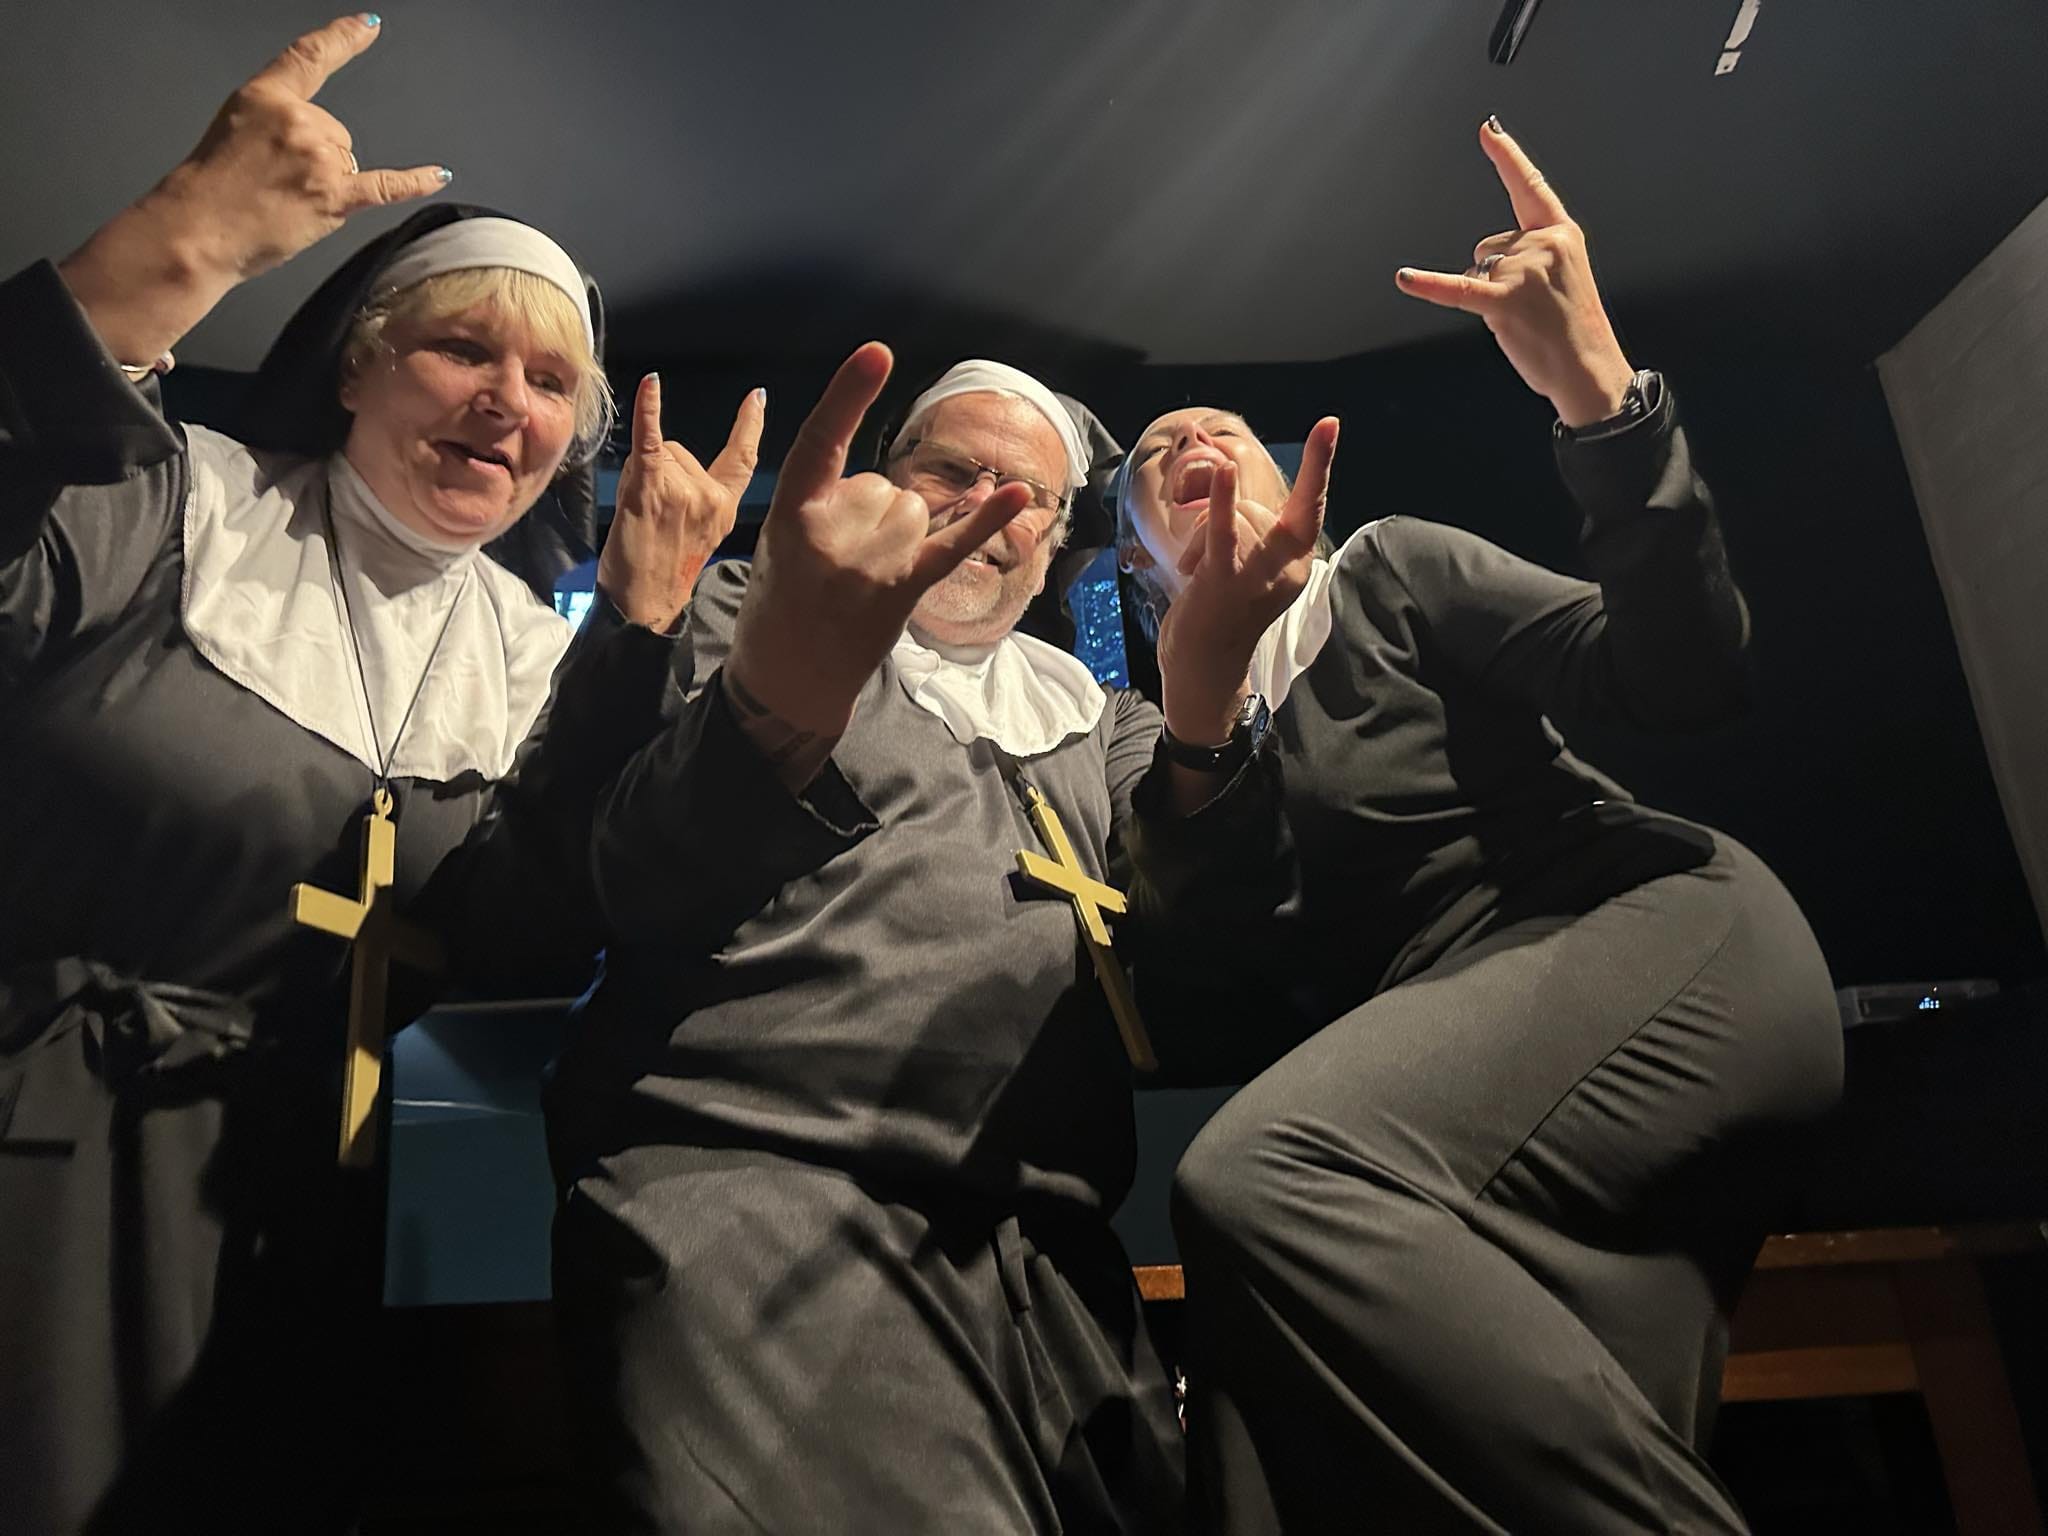 The nuns are ready for the Sound of Music